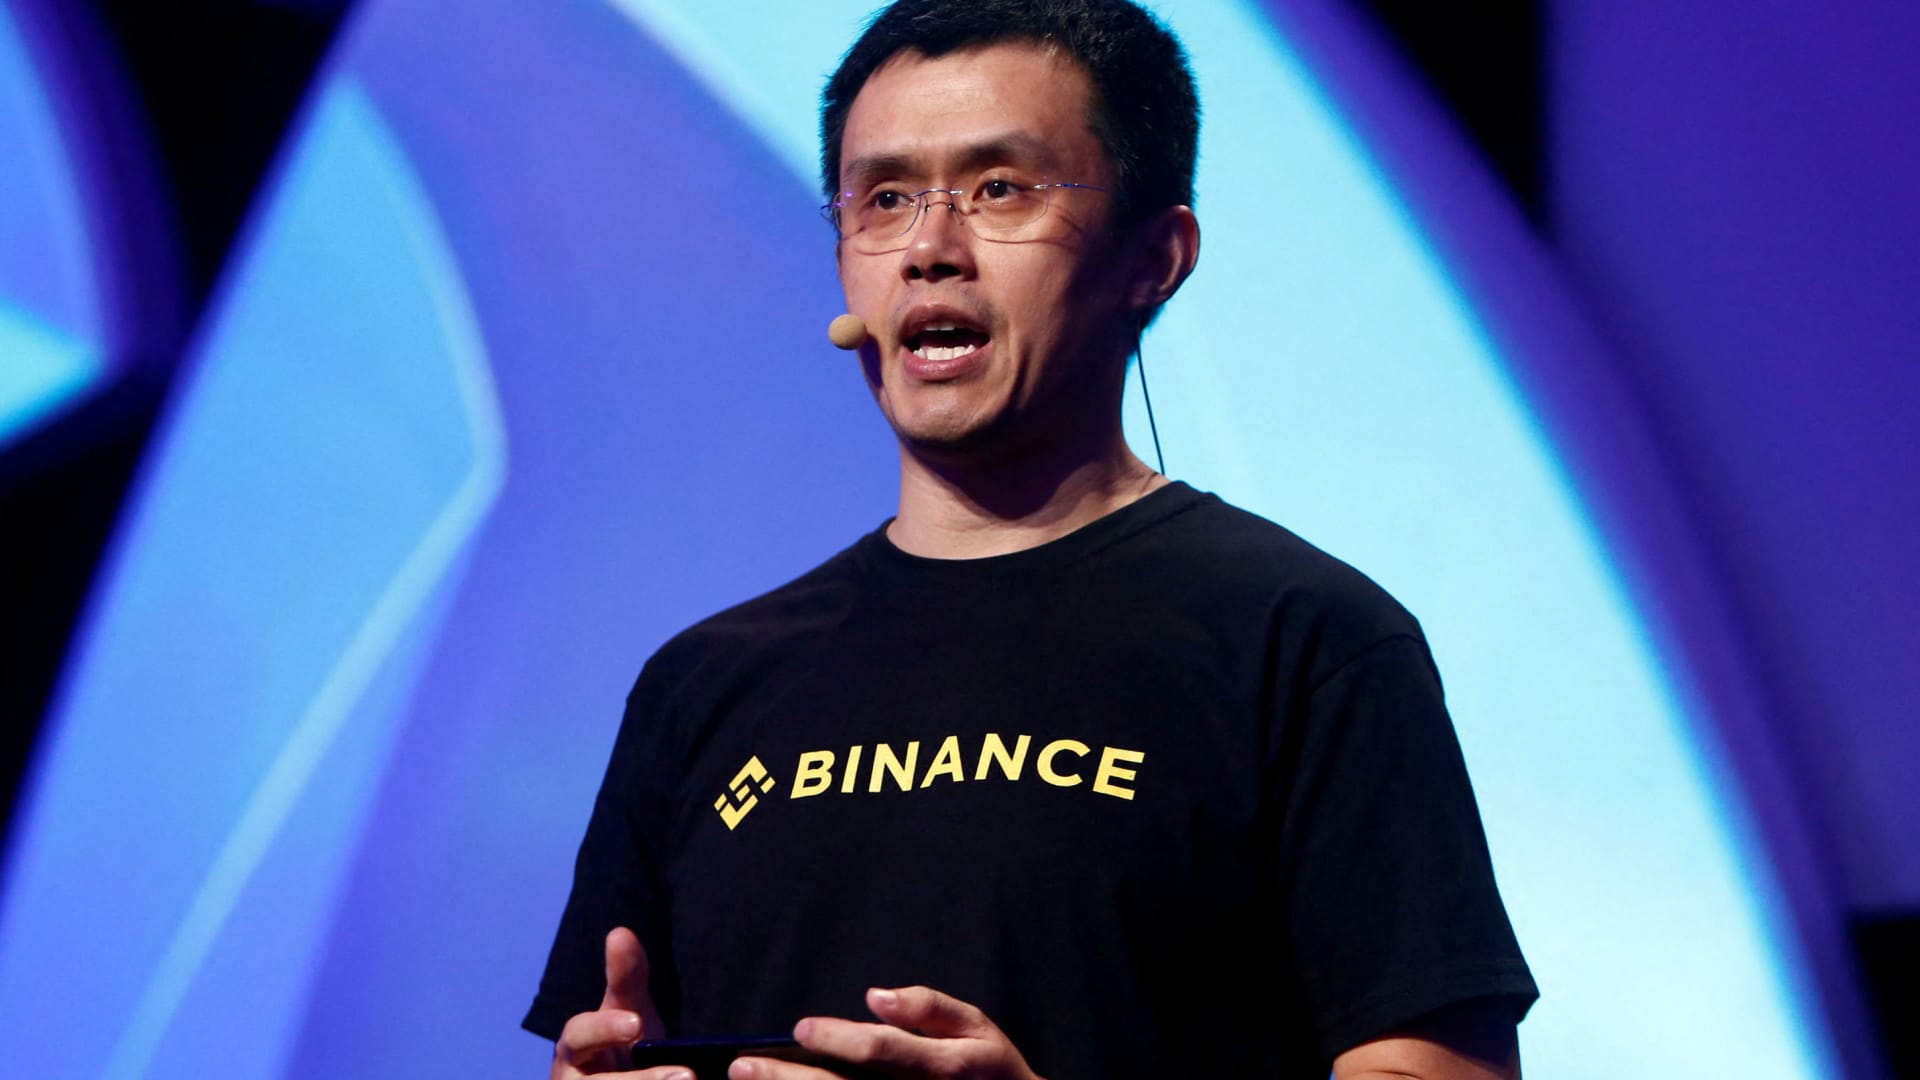 Binance CEO Zhao brushes off .1 billion FTX clawback concerns